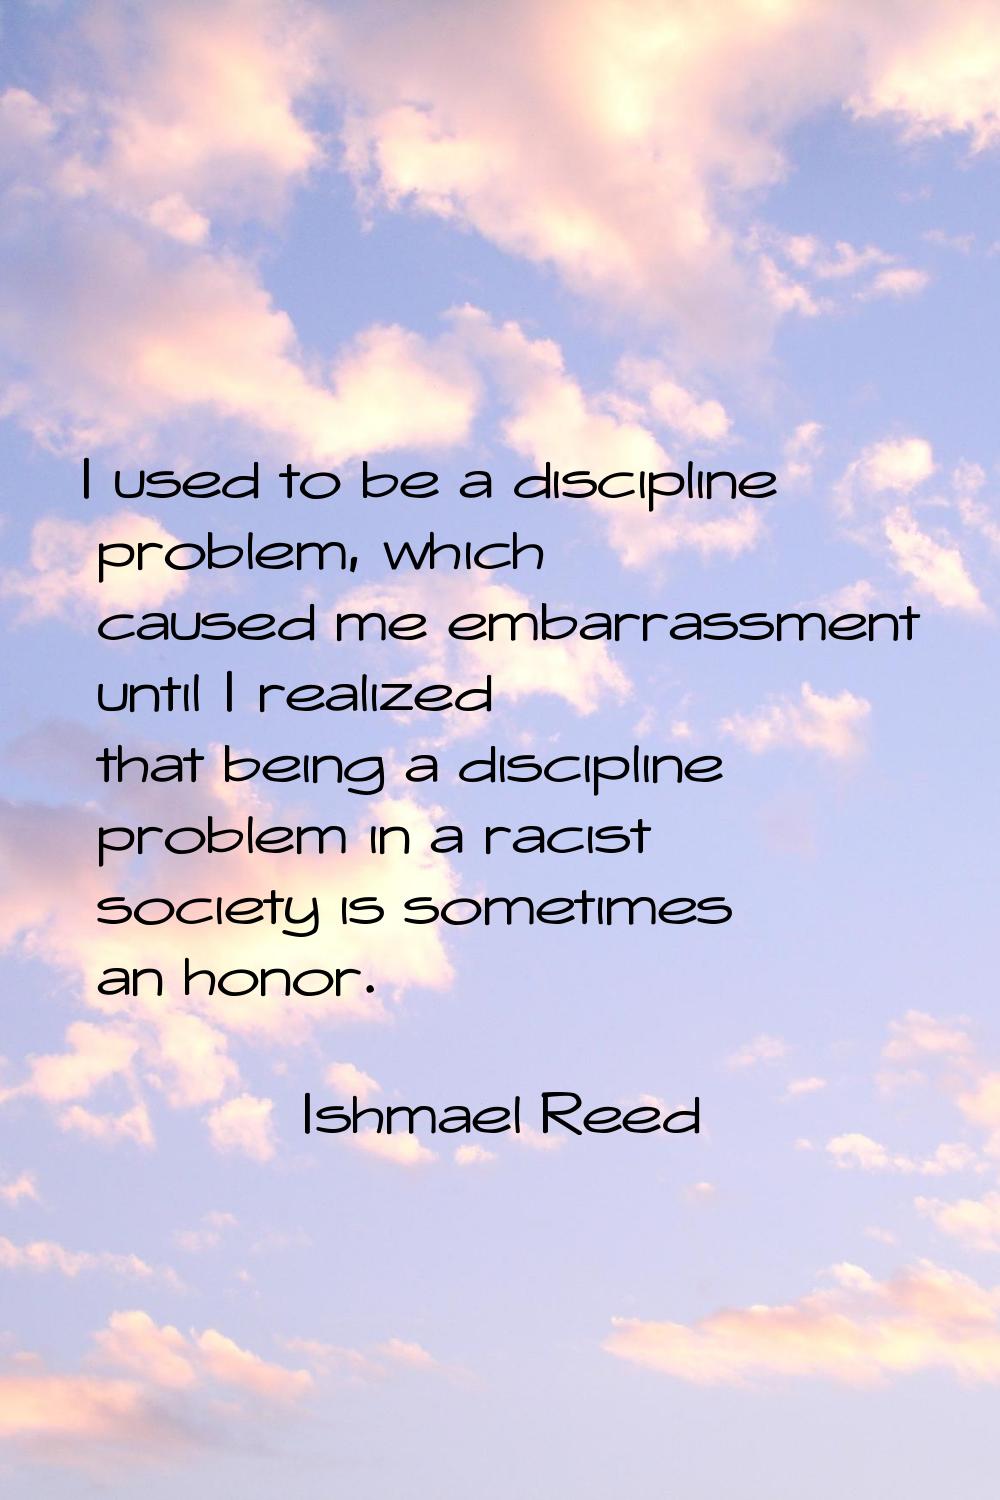 I used to be a discipline problem, which caused me embarrassment until I realized that being a disc